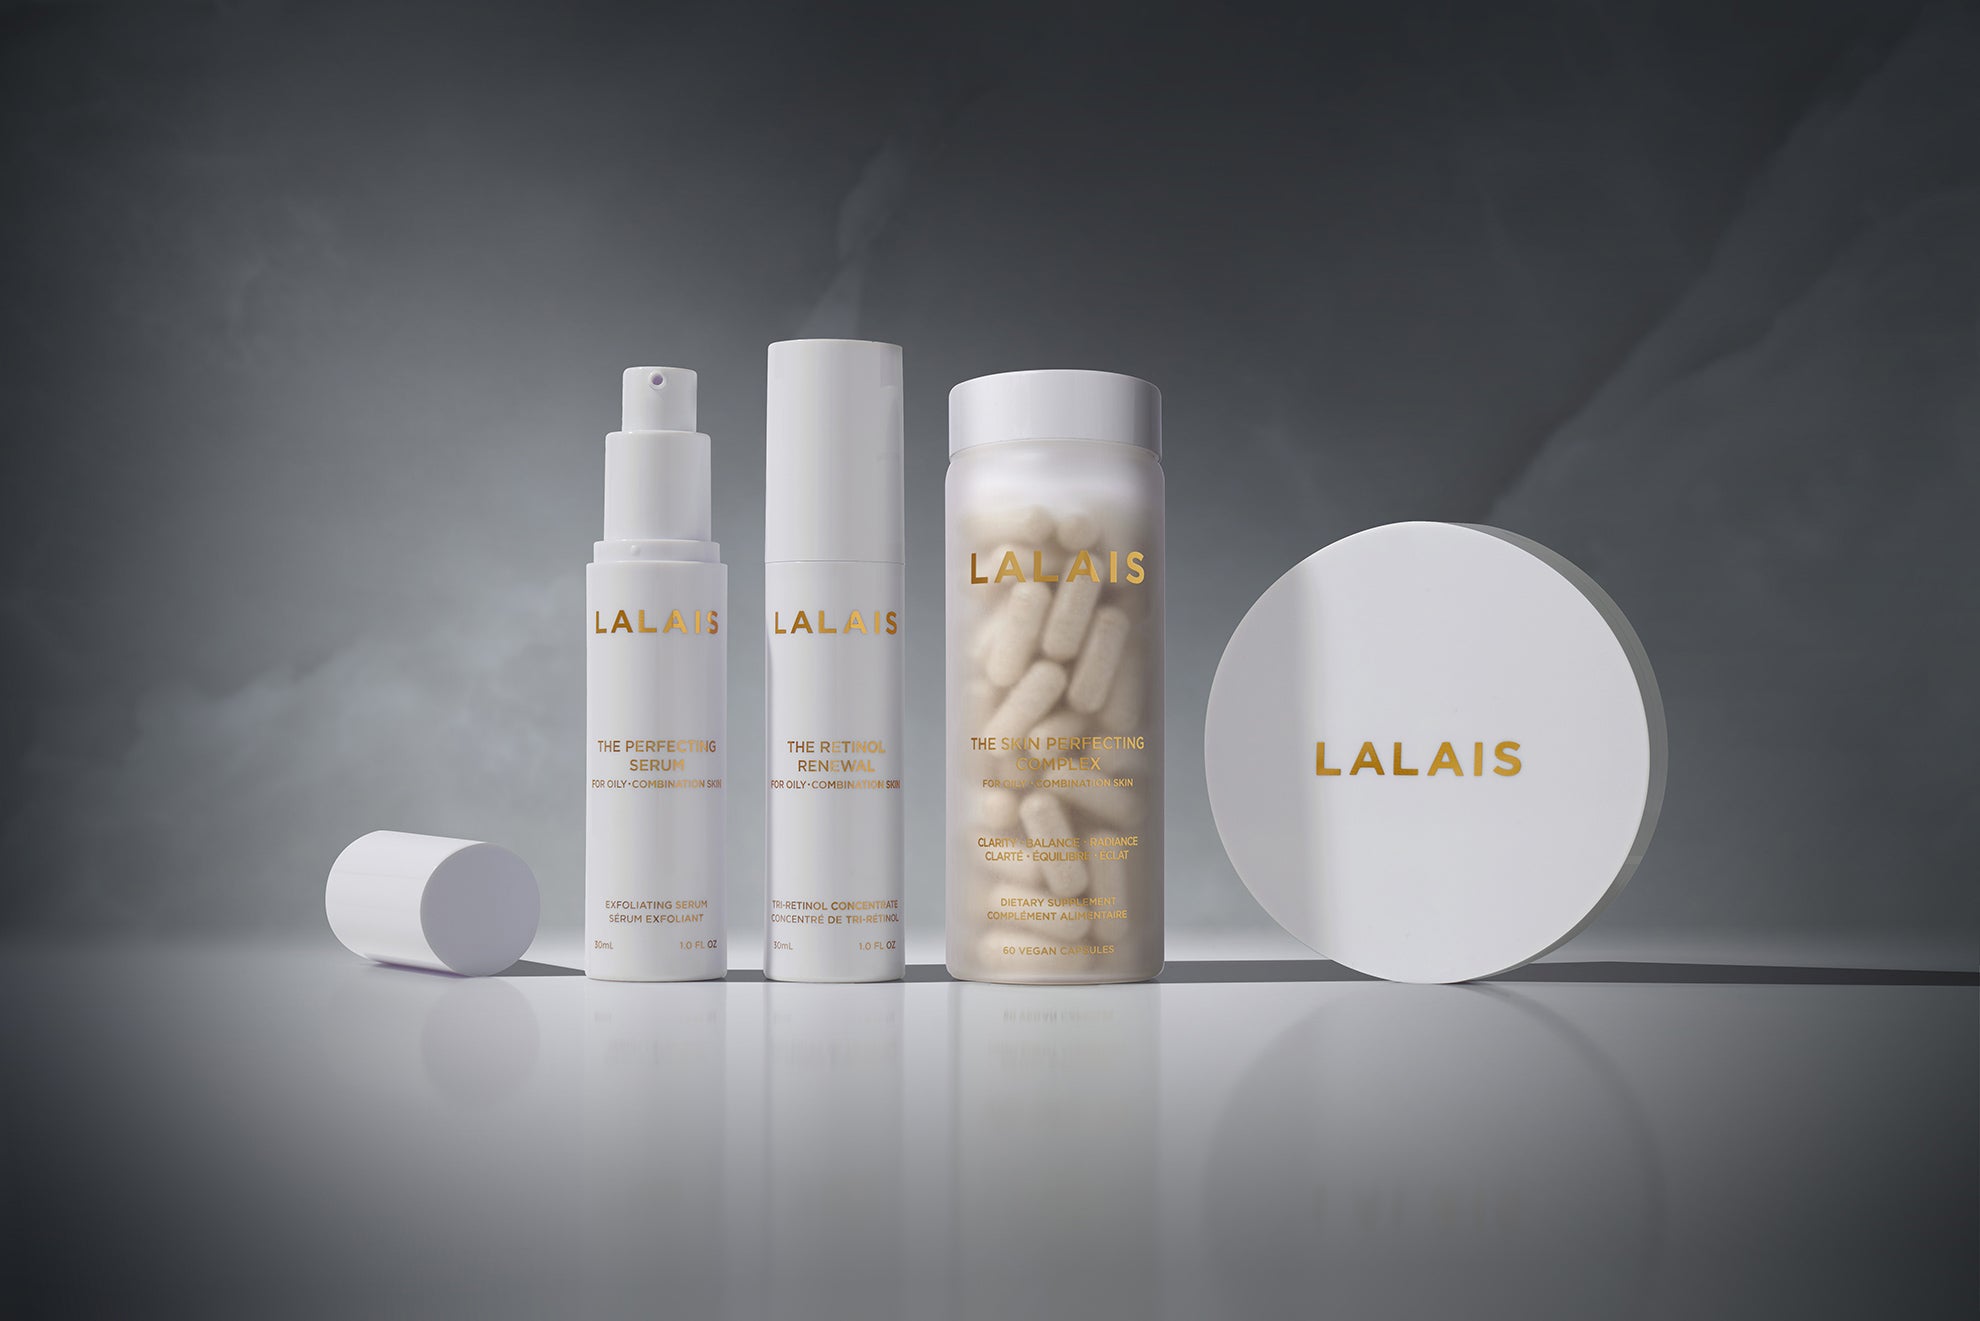 Four Lalais skincare items on a grey background: Serum, Retinol, Complex, and Blotting Compact.